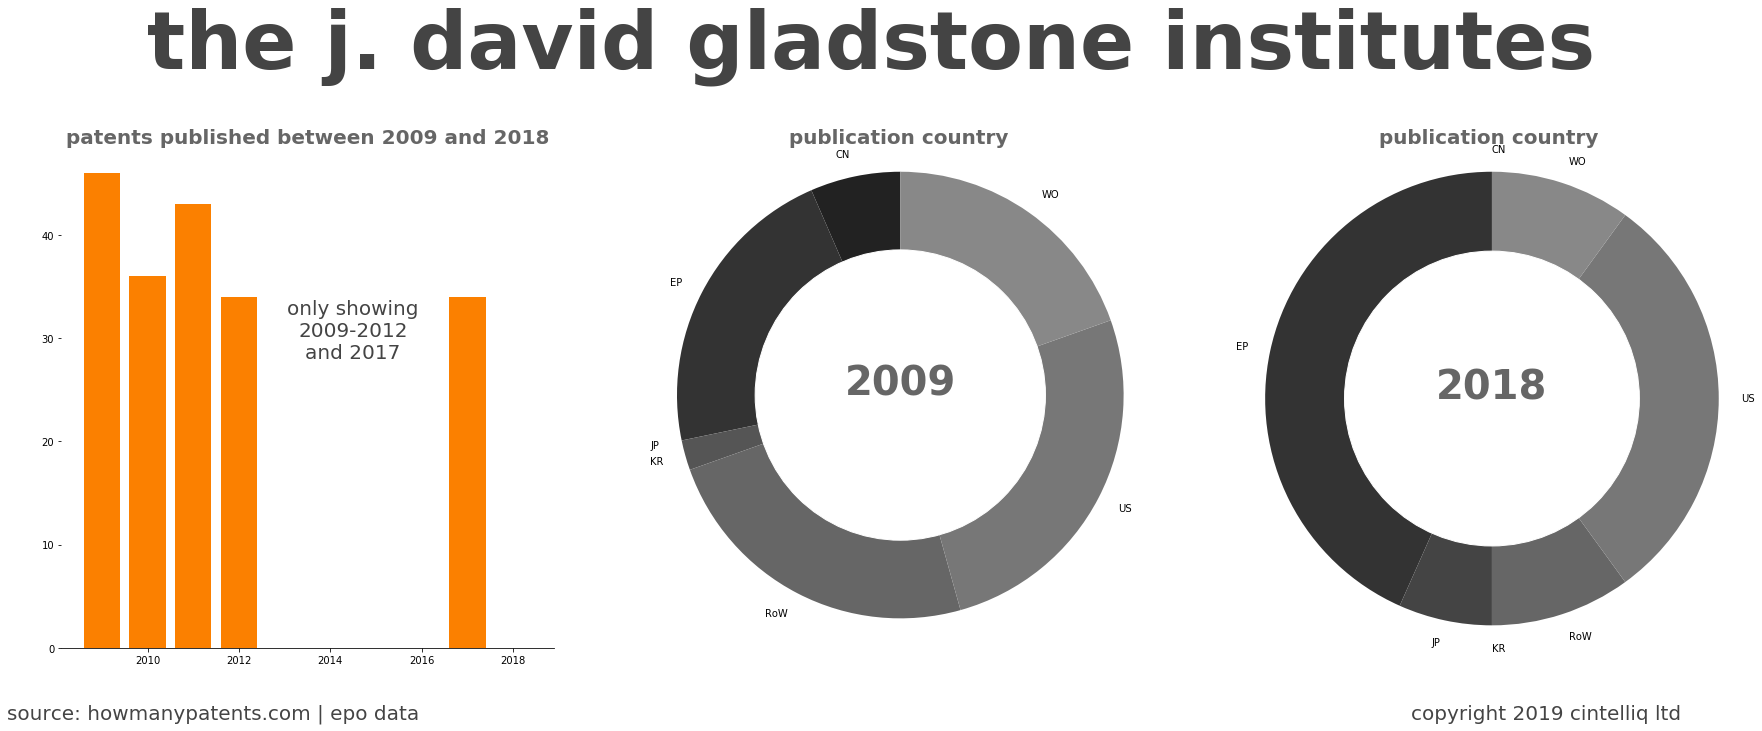 summary of patents for The J. David Gladstone Institutes